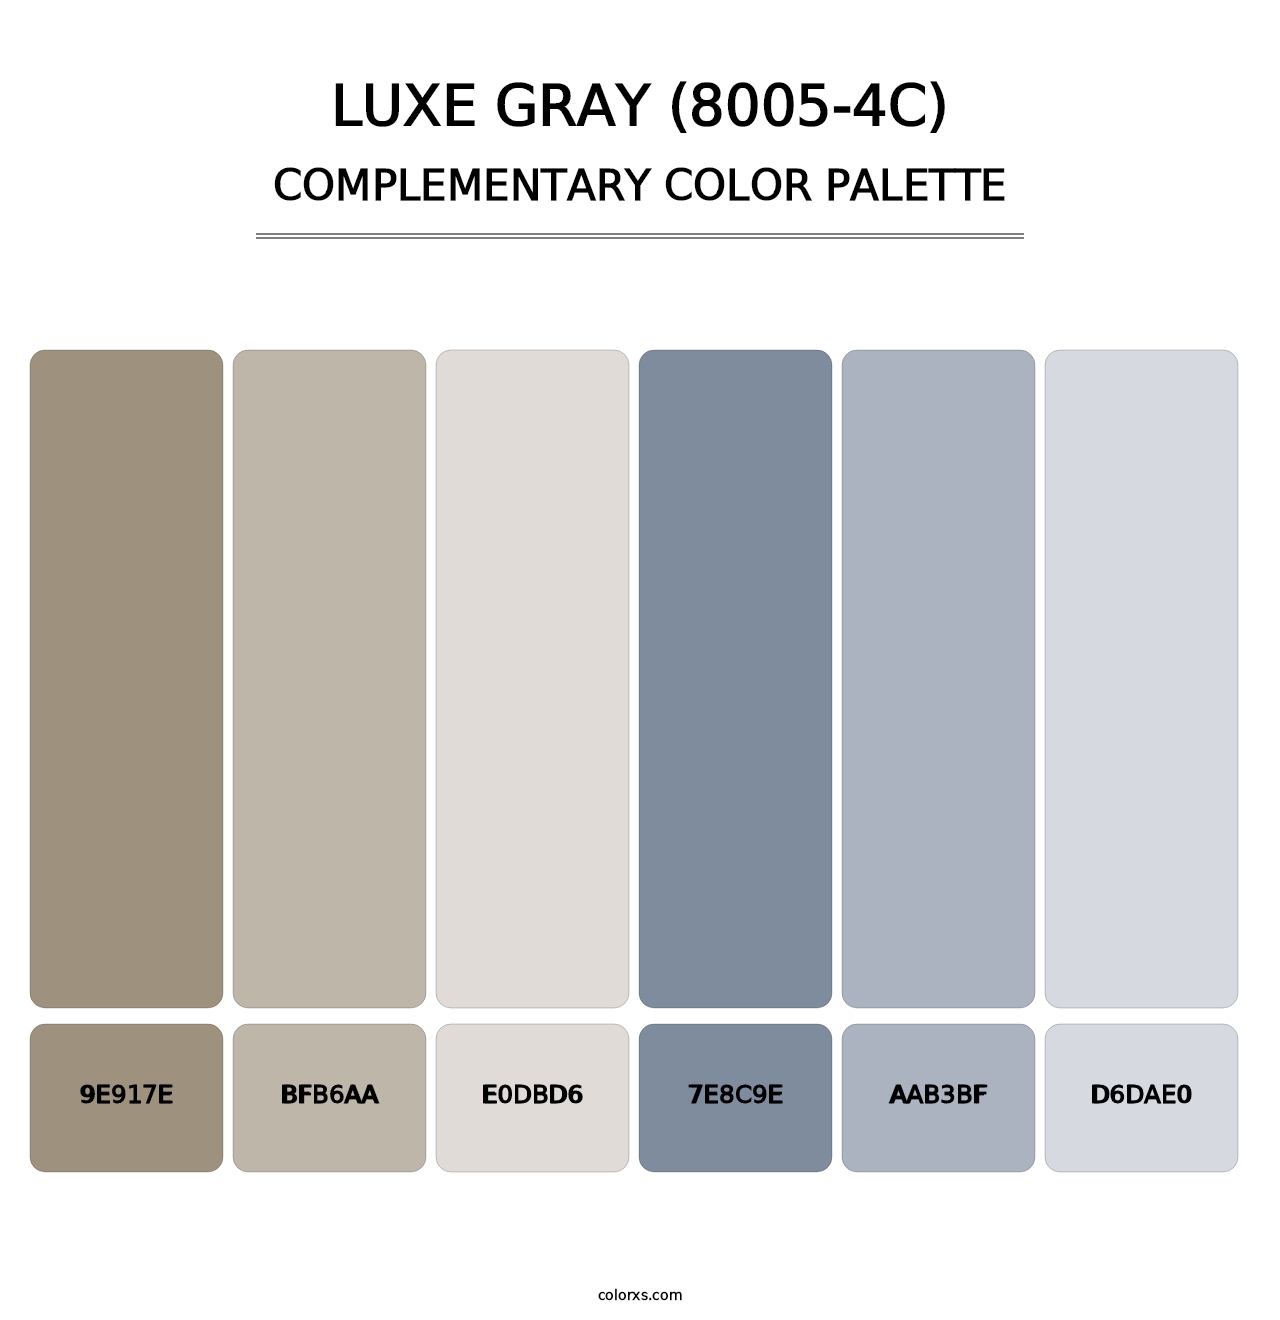 Luxe Gray (8005-4C) - Complementary Color Palette